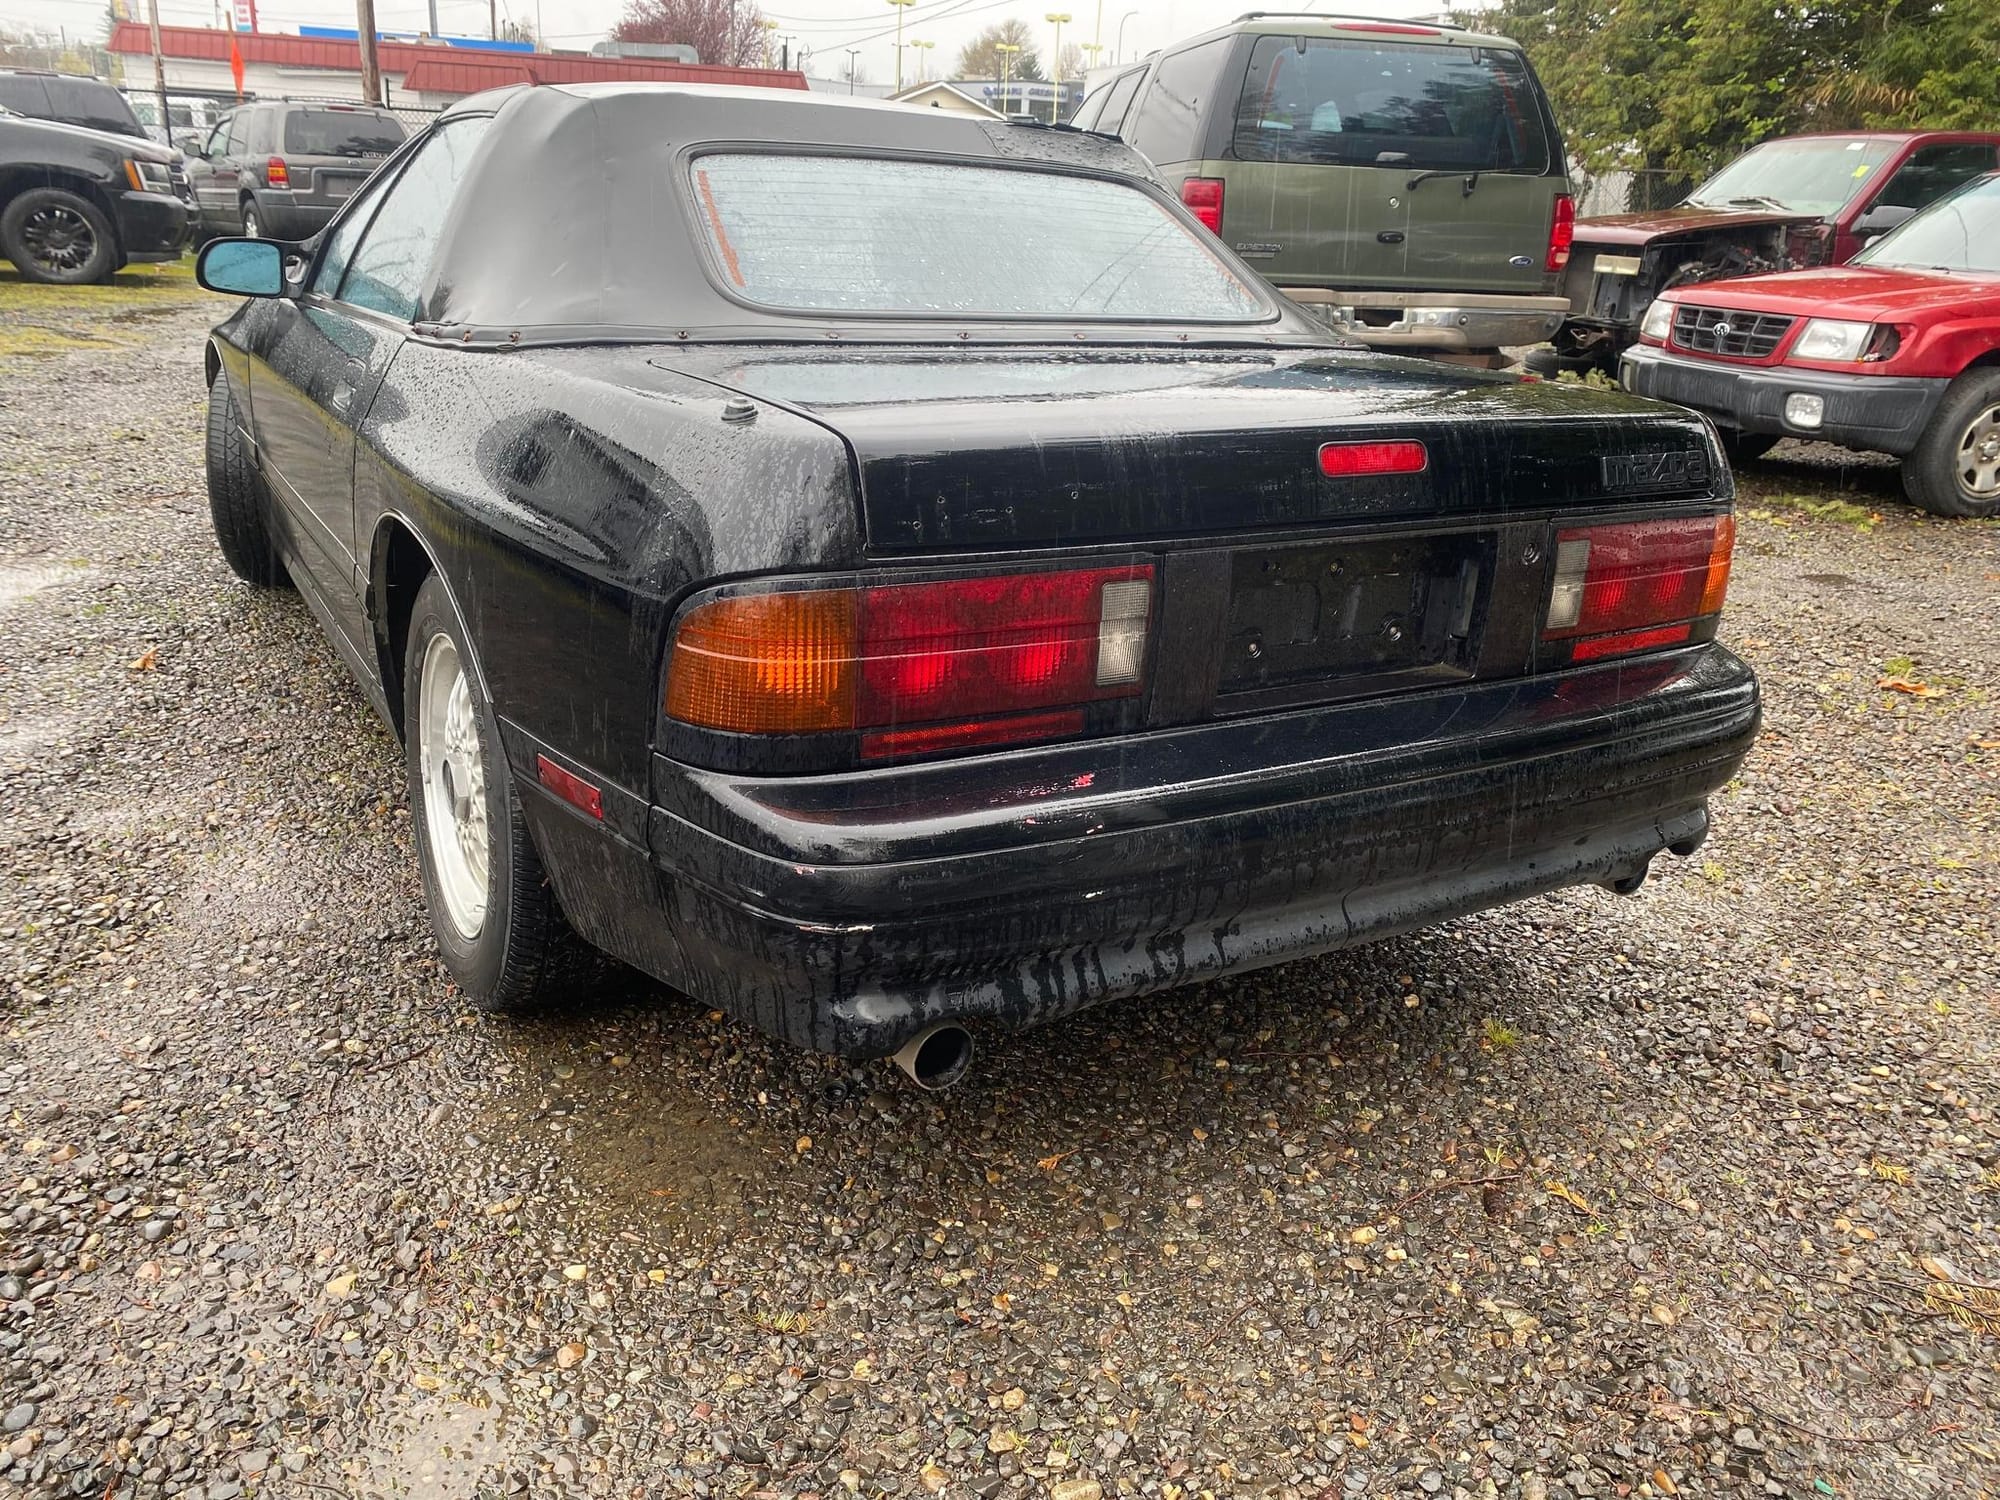 1990 Mazda RX-7 - Running, Driving Project FC Vert - Used - VIN JM1FC3523M0900426 - 99,000 Miles - Other - 2WD - Automatic - Convertible - Black - Portland, OR 97230, United States